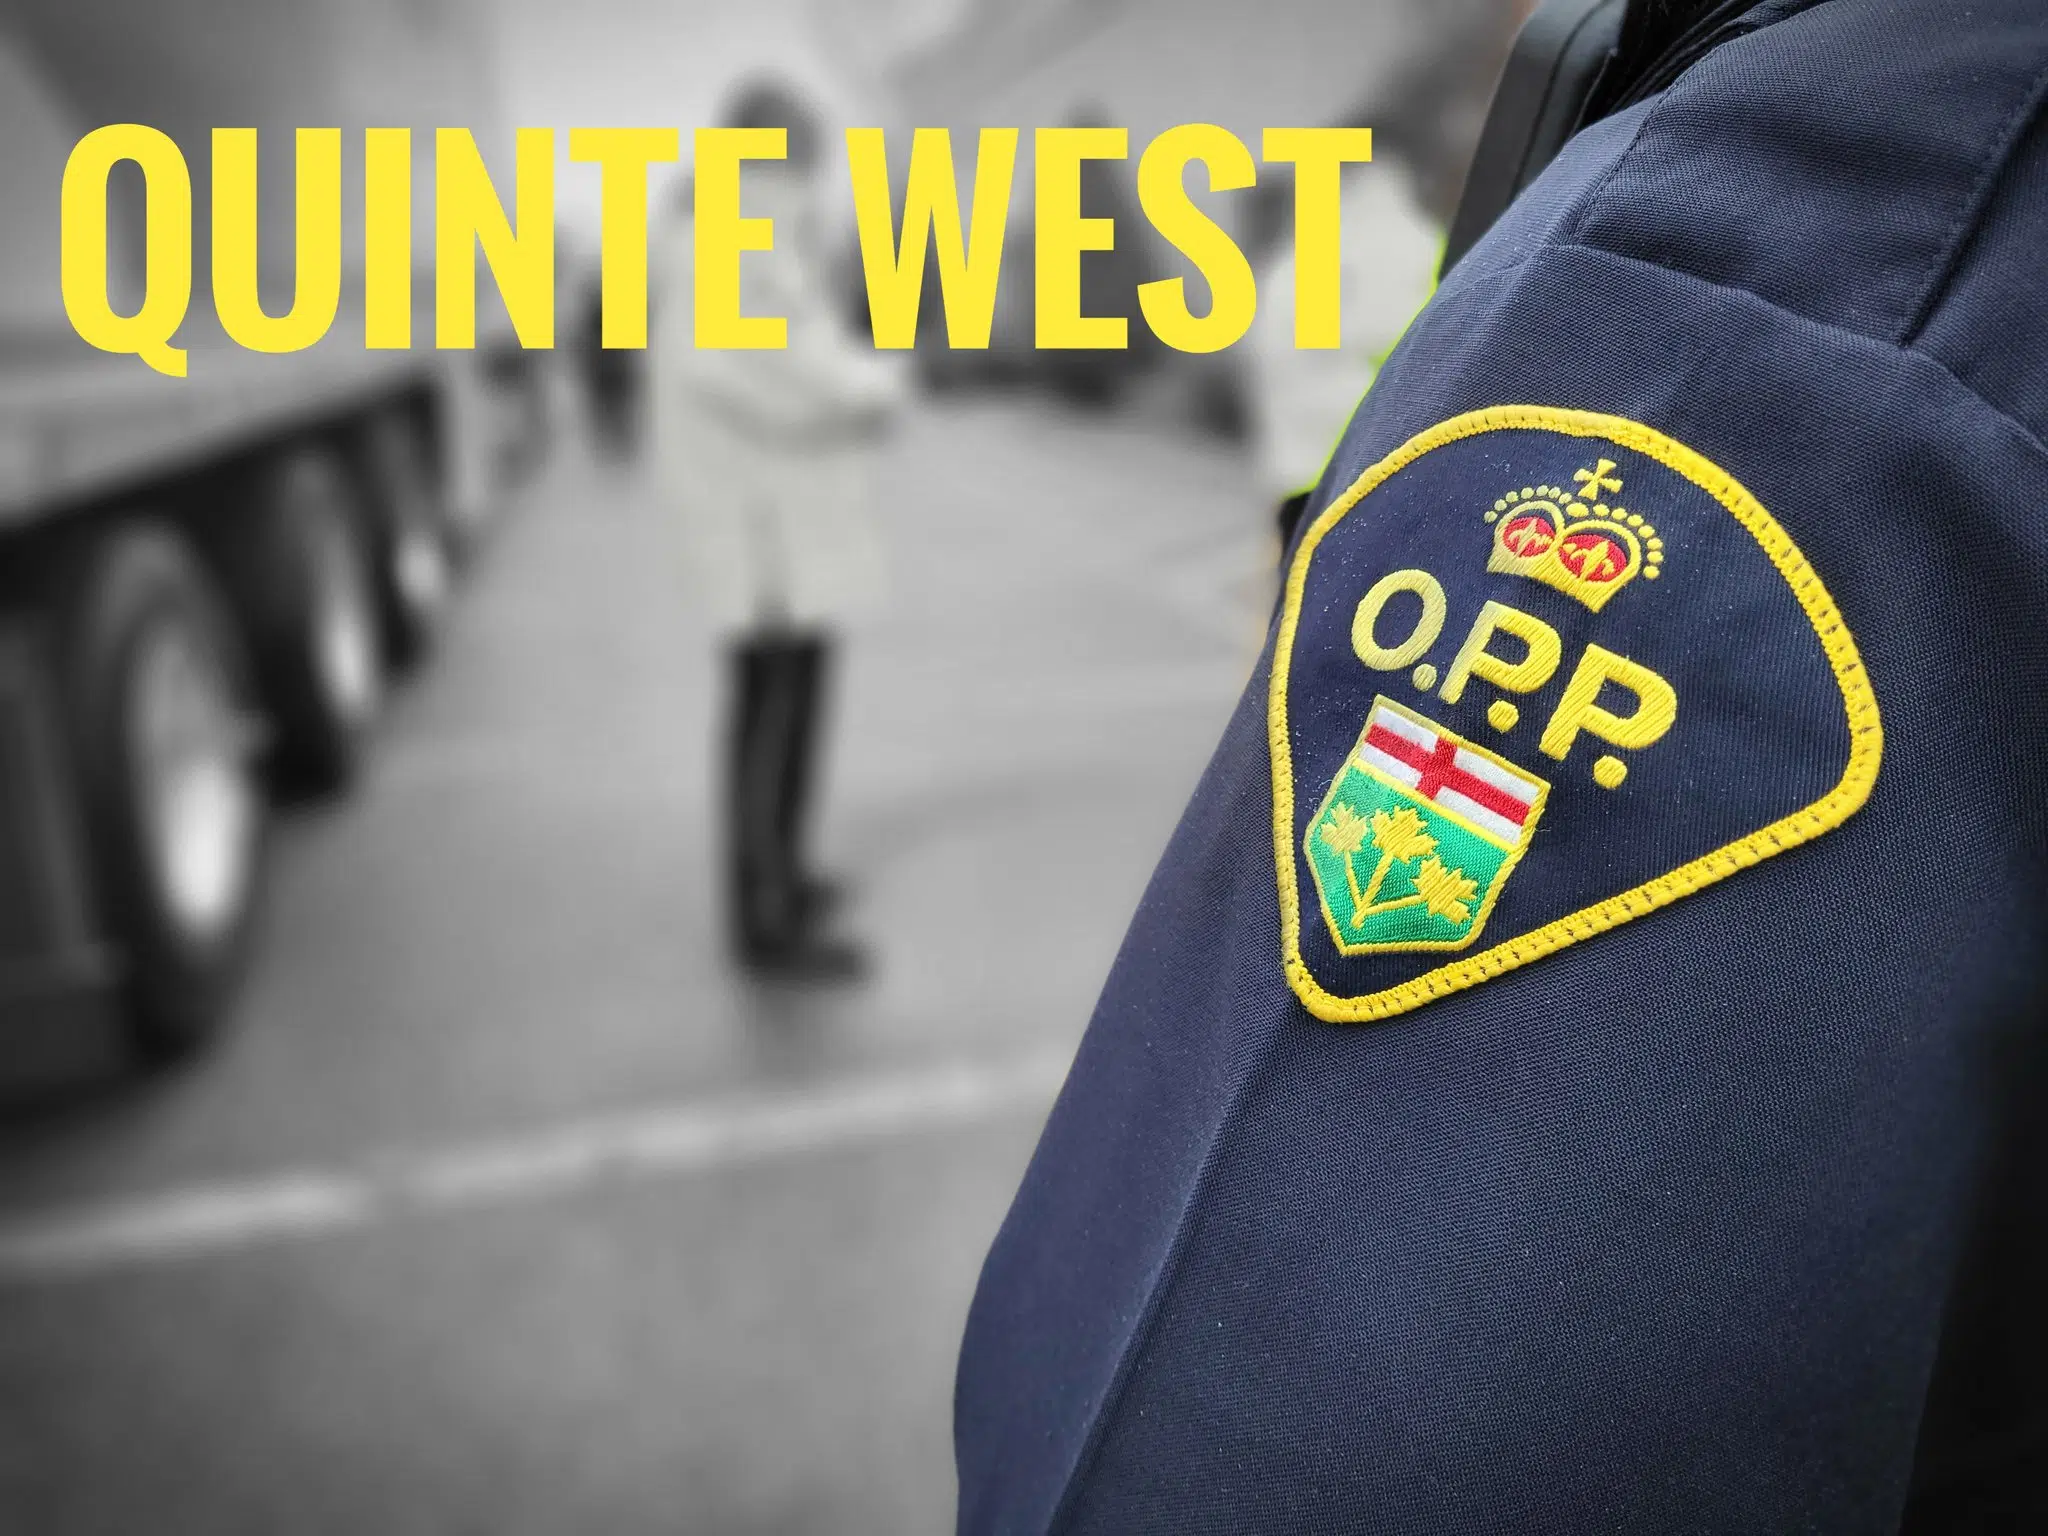 Quinte West man arrested for firearms offences